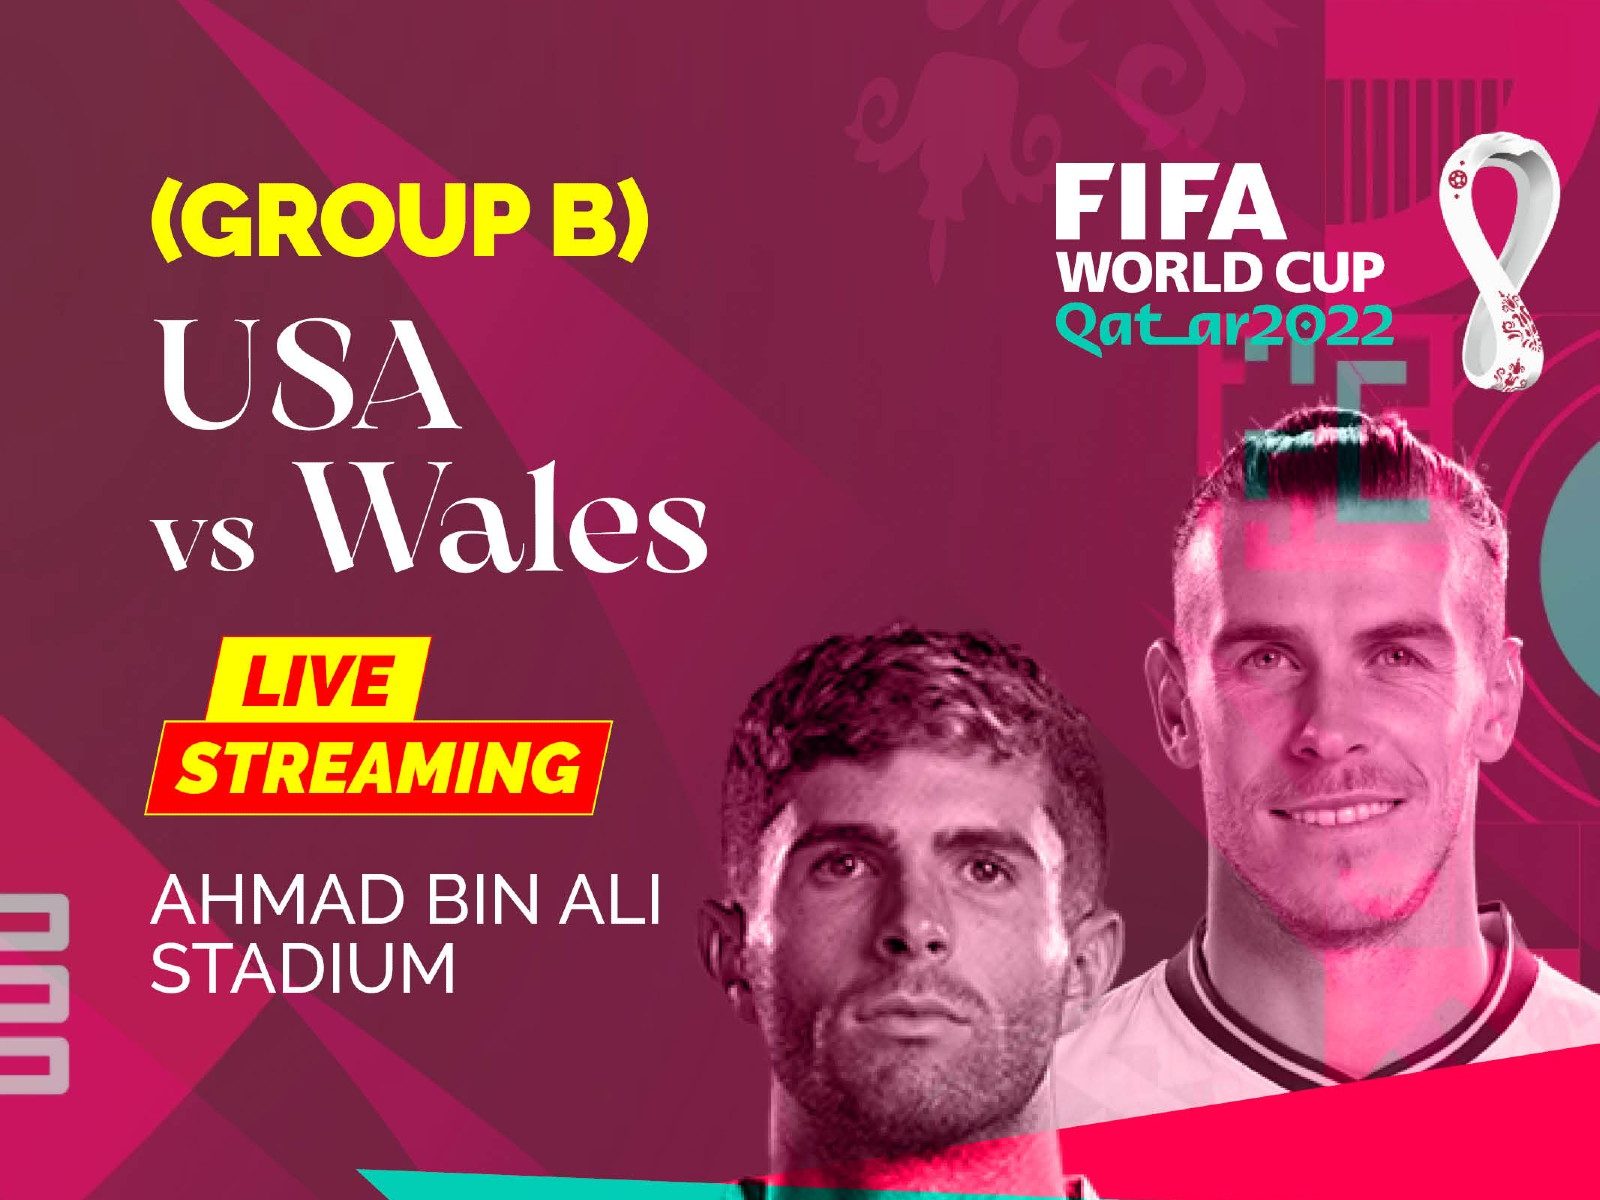 USA vs Wales Live Streaming When and Where to Watch FIFA World Cup 2022 Live Coverage on Live TV Online